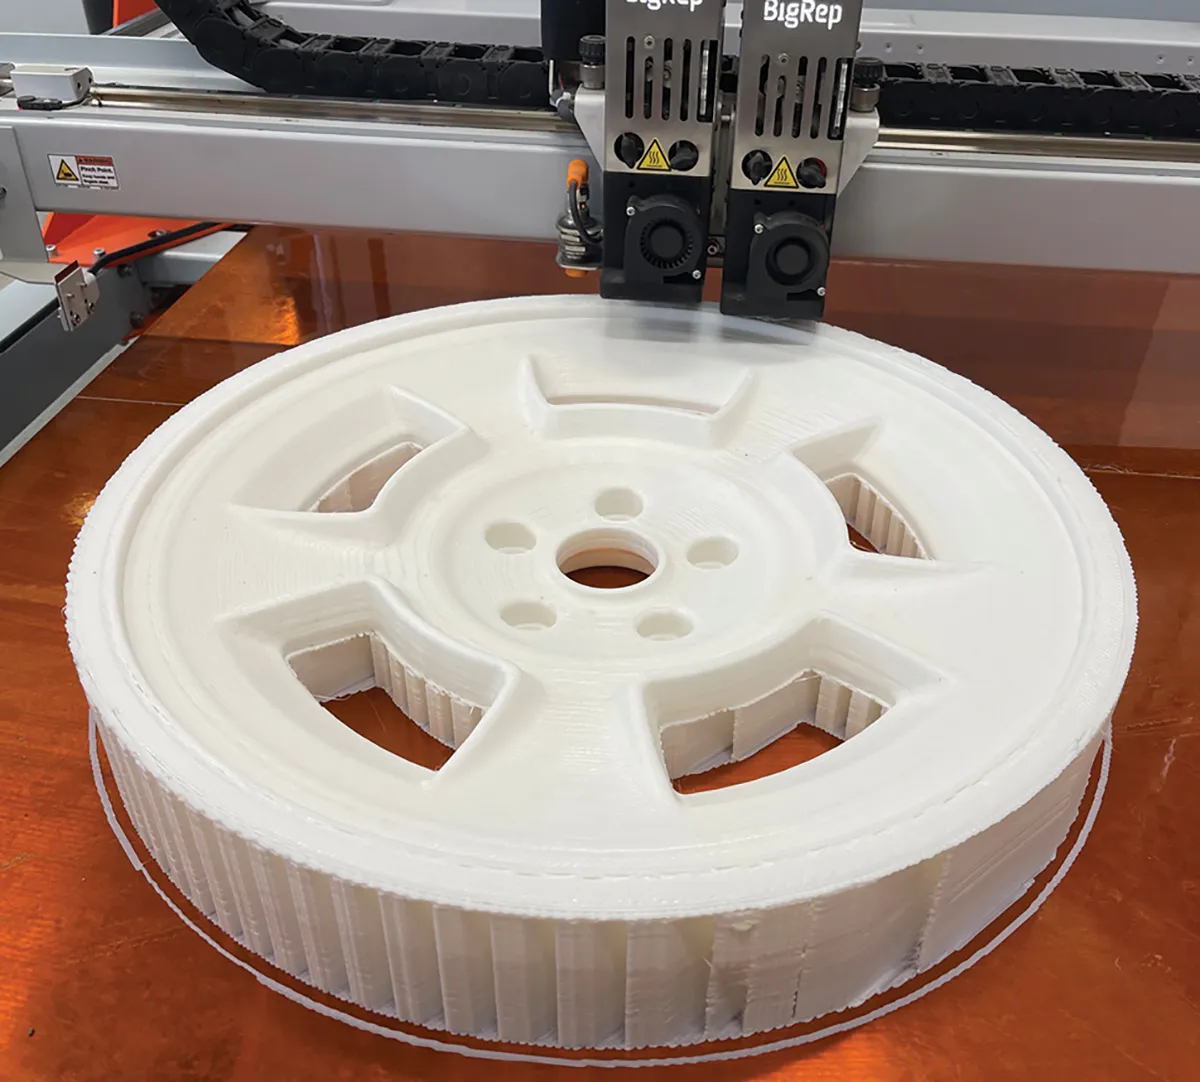 As with many of the elaborate components of the car, a test piece was printed to allow a careful review before committing to making the parts from expensive aluminum billet.